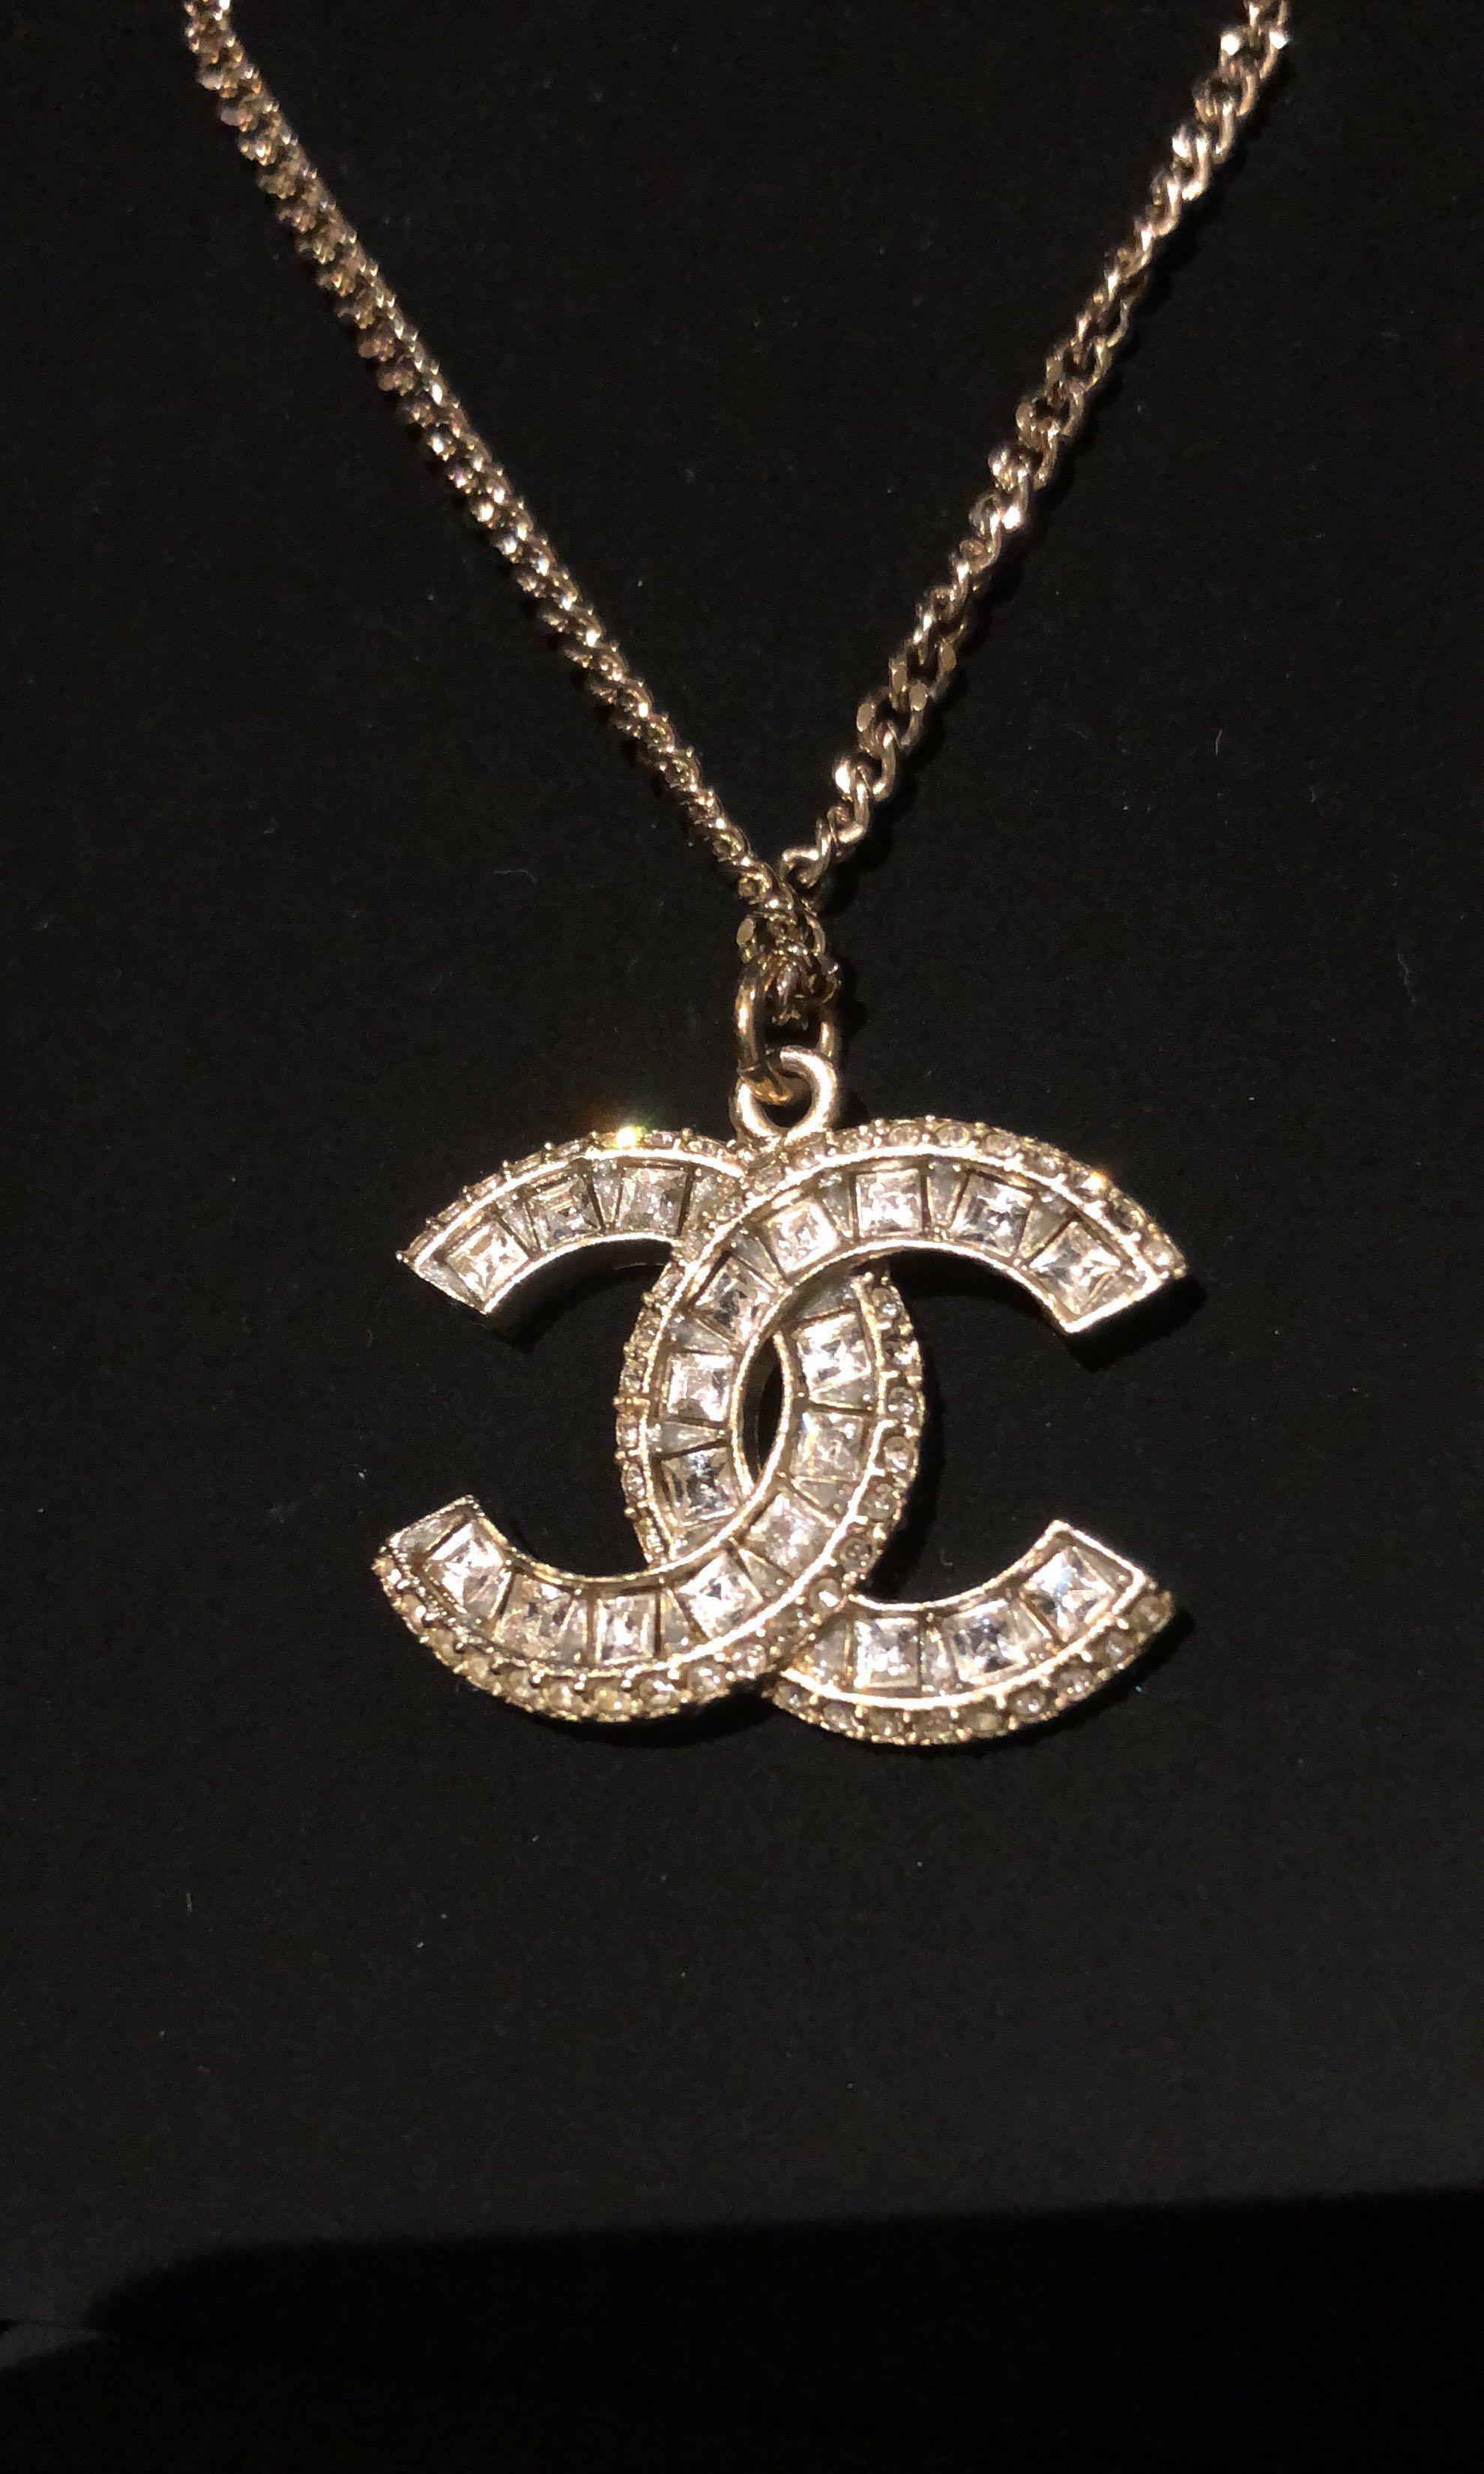 Chanel Timeless CC Necklace Crystal in SilverTone Metal with SilverTone   US